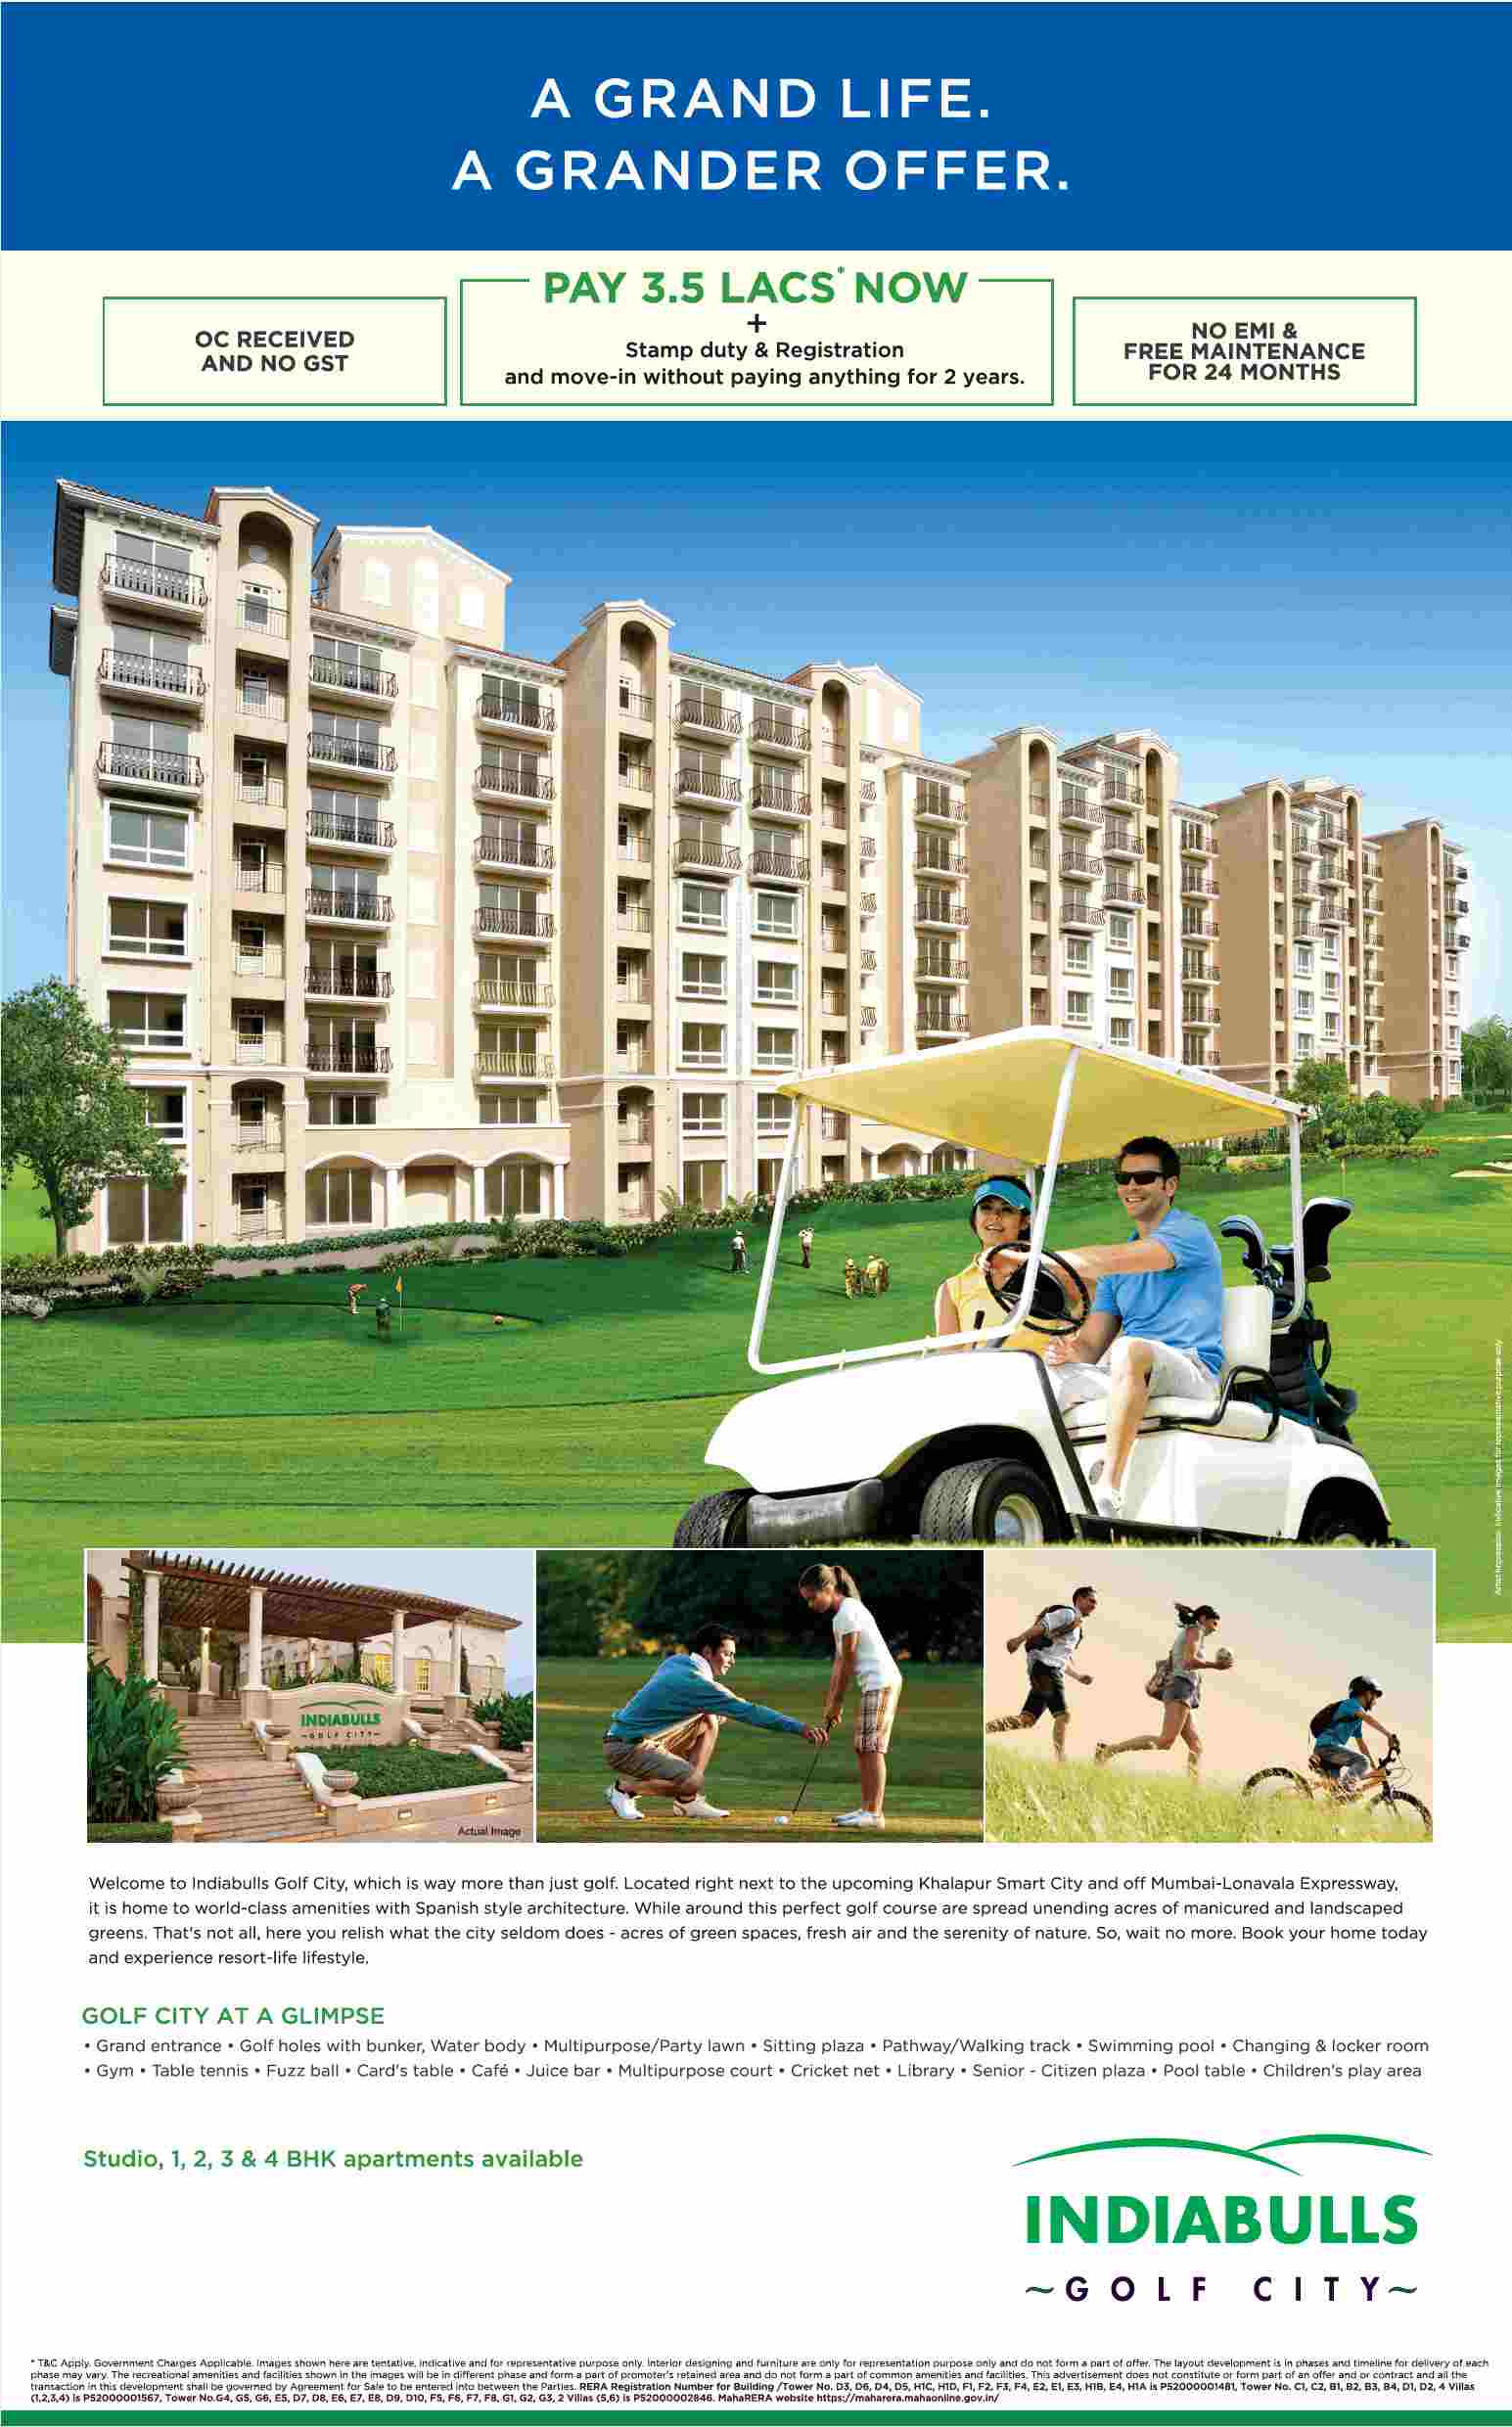 Pay 3.5 Lacs now + stamp duty & registration and move-in at Indiabulls Golf City in Mumbai